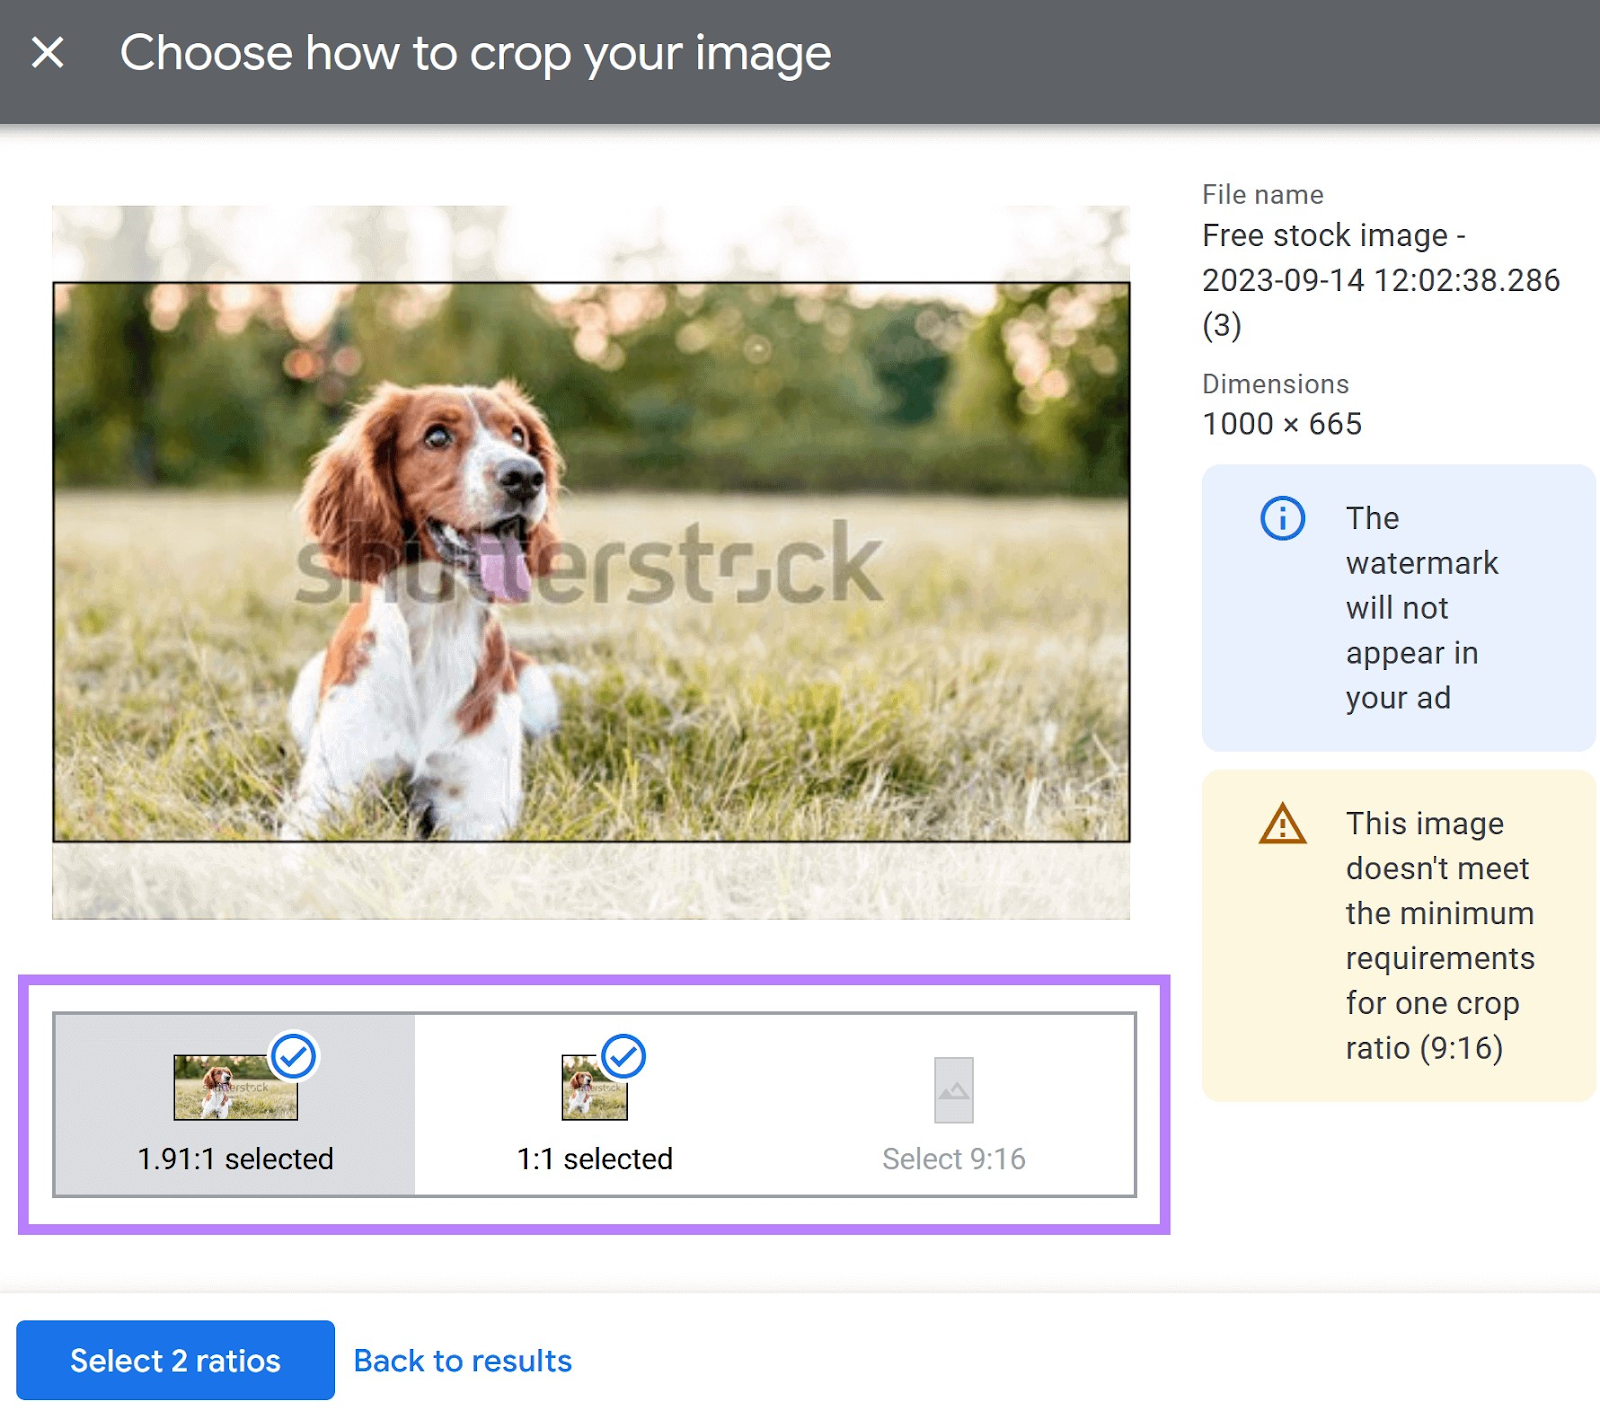 Images rations highlighted in "Choose how to crop your image" window